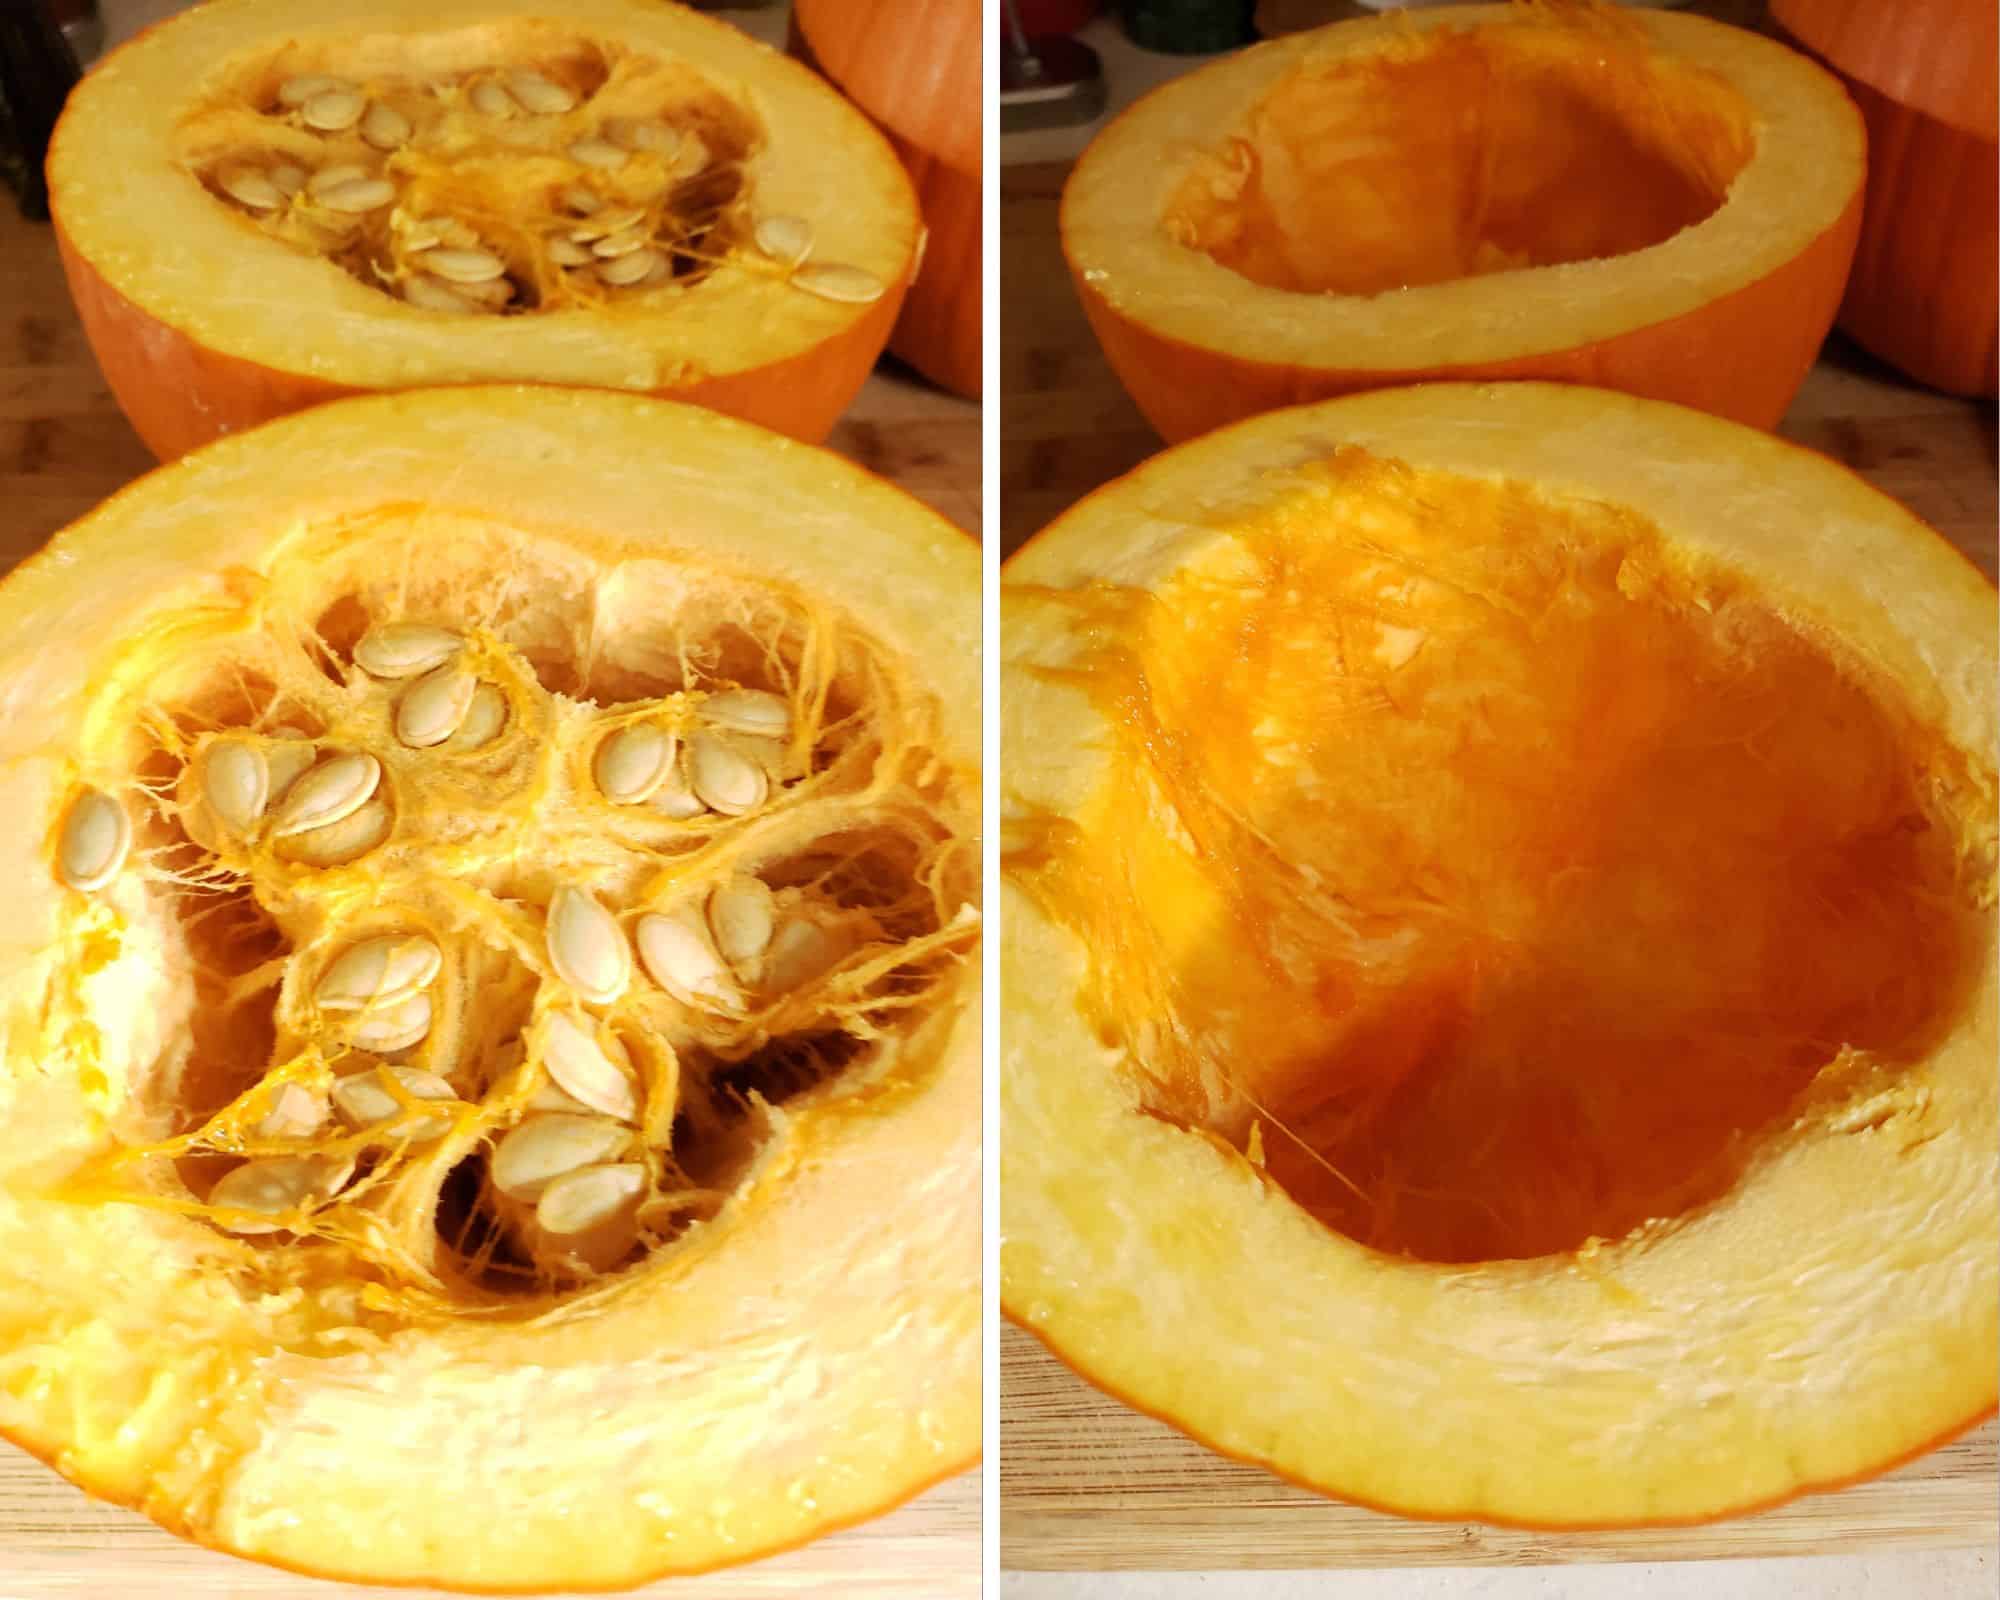 Photos of the seeds being removed from the pumpkin.